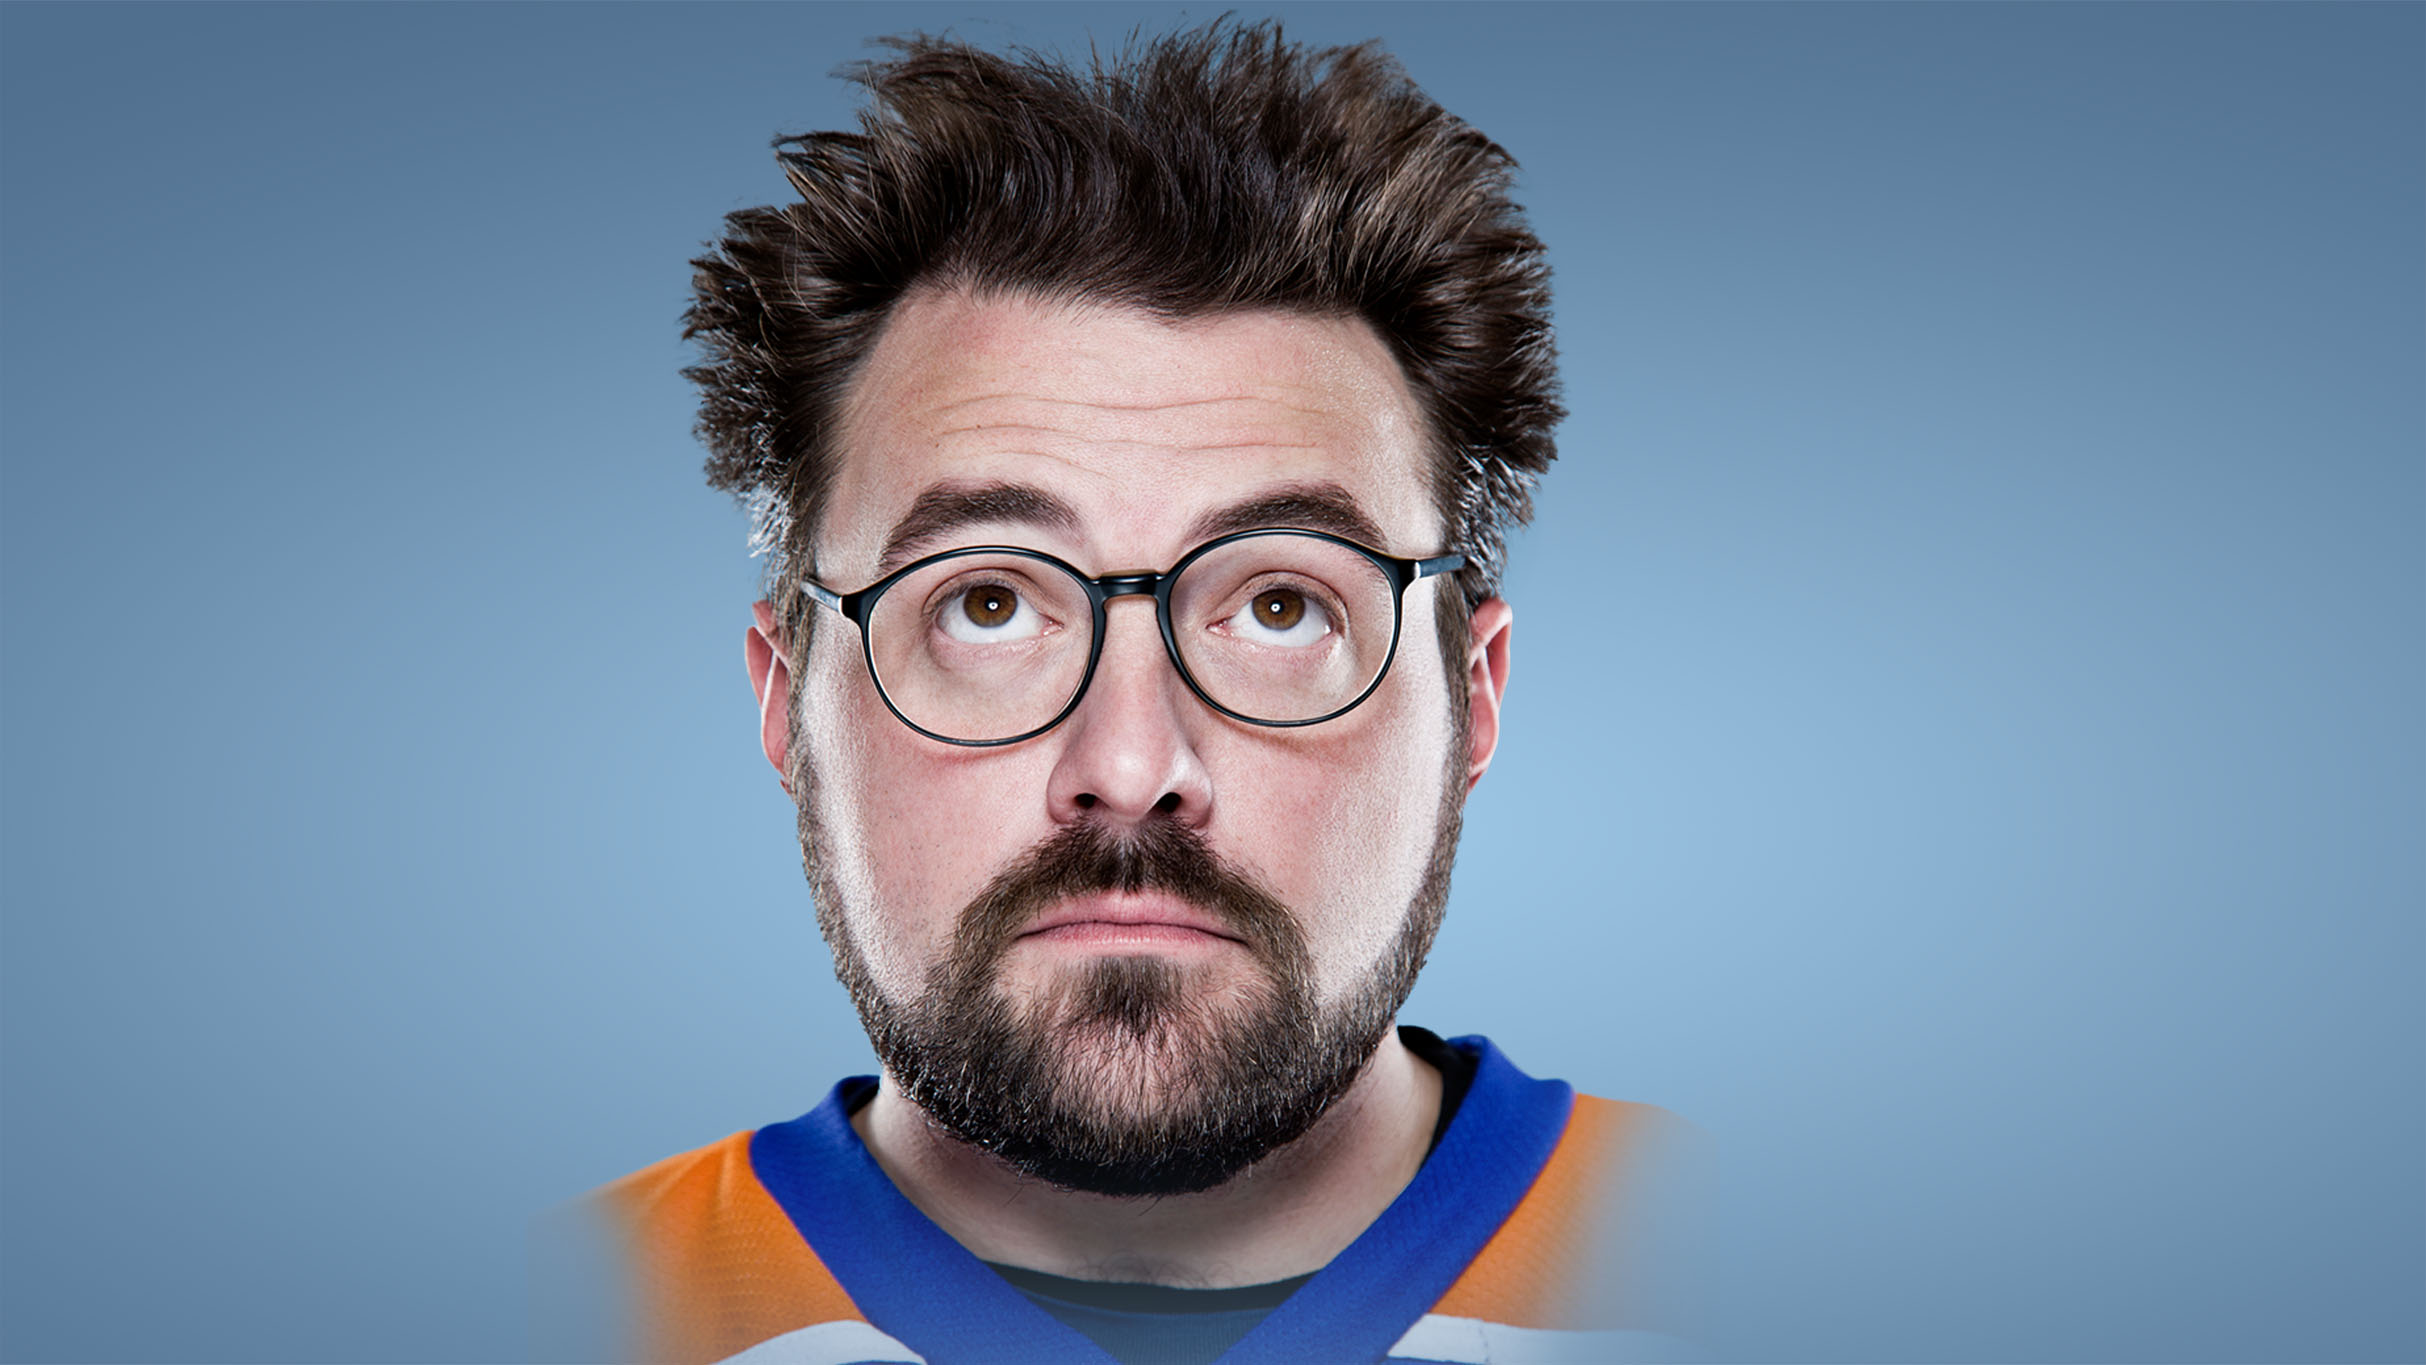 An Evening with Kevin Smith